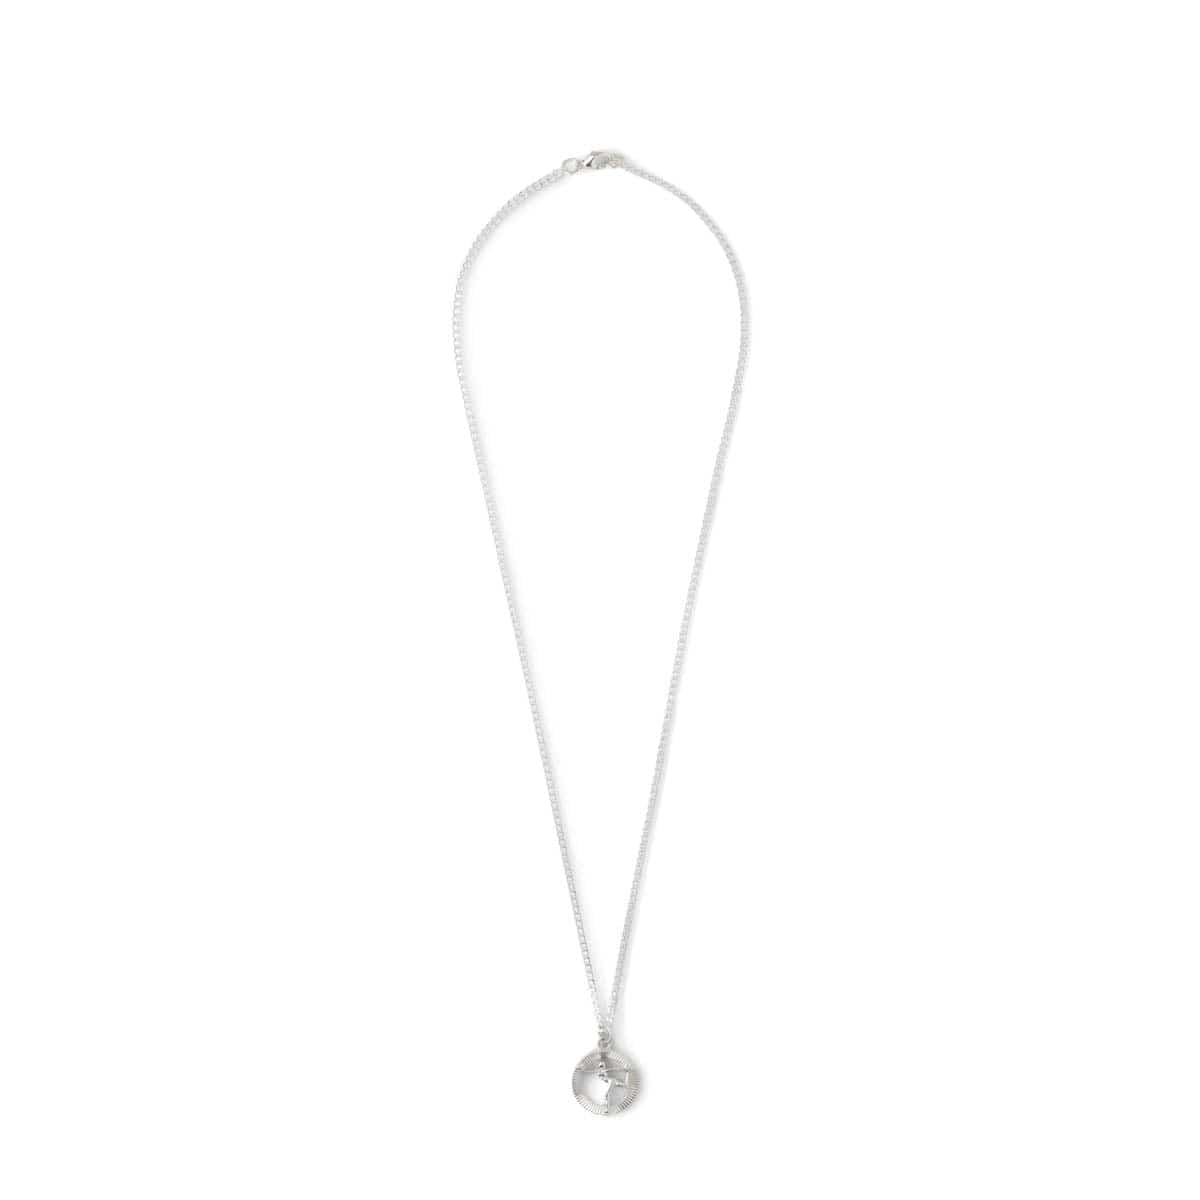 GRACE CHAIN NECKLACE STERLING SILVER 925 | Bodega